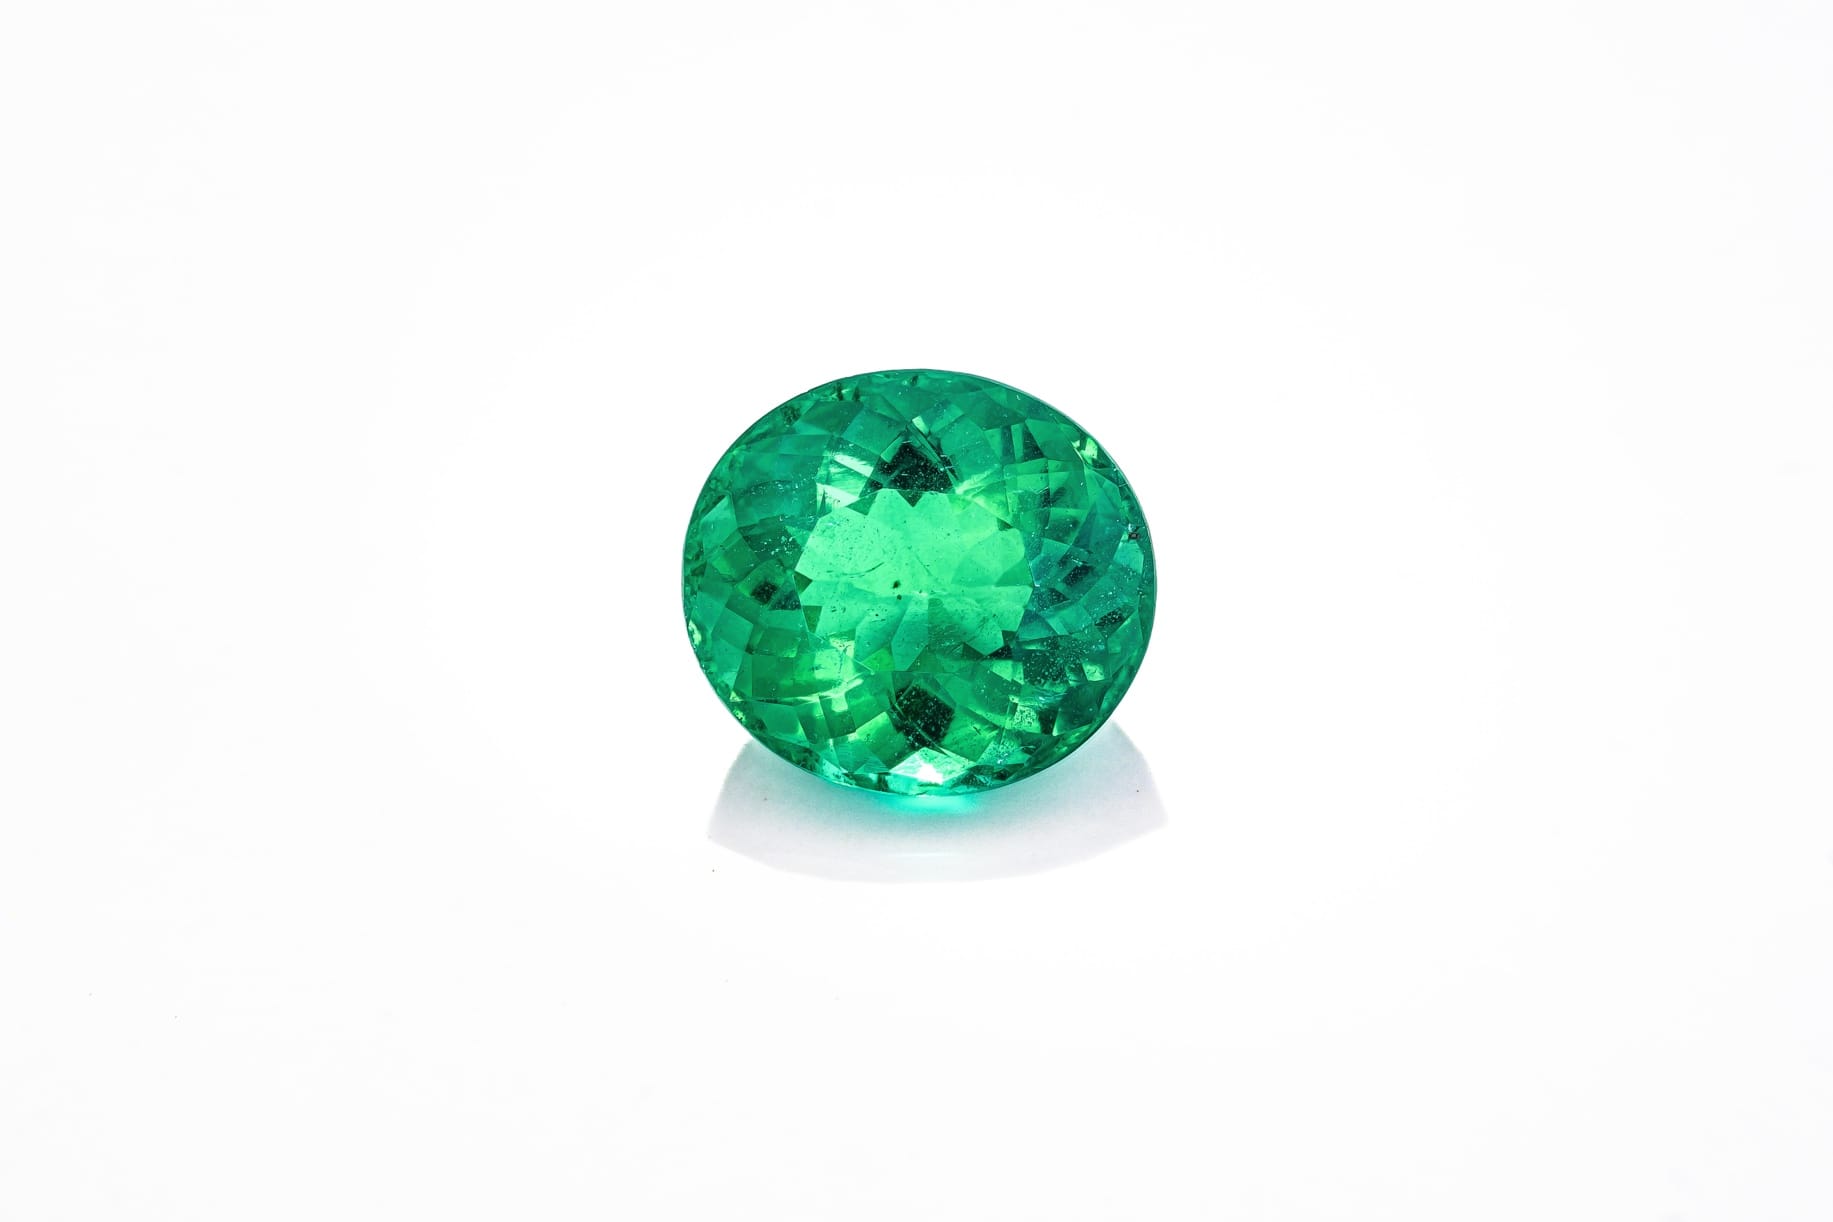 Weighing 6.11 cm, this emerald is unusually large for clean material from Brazil